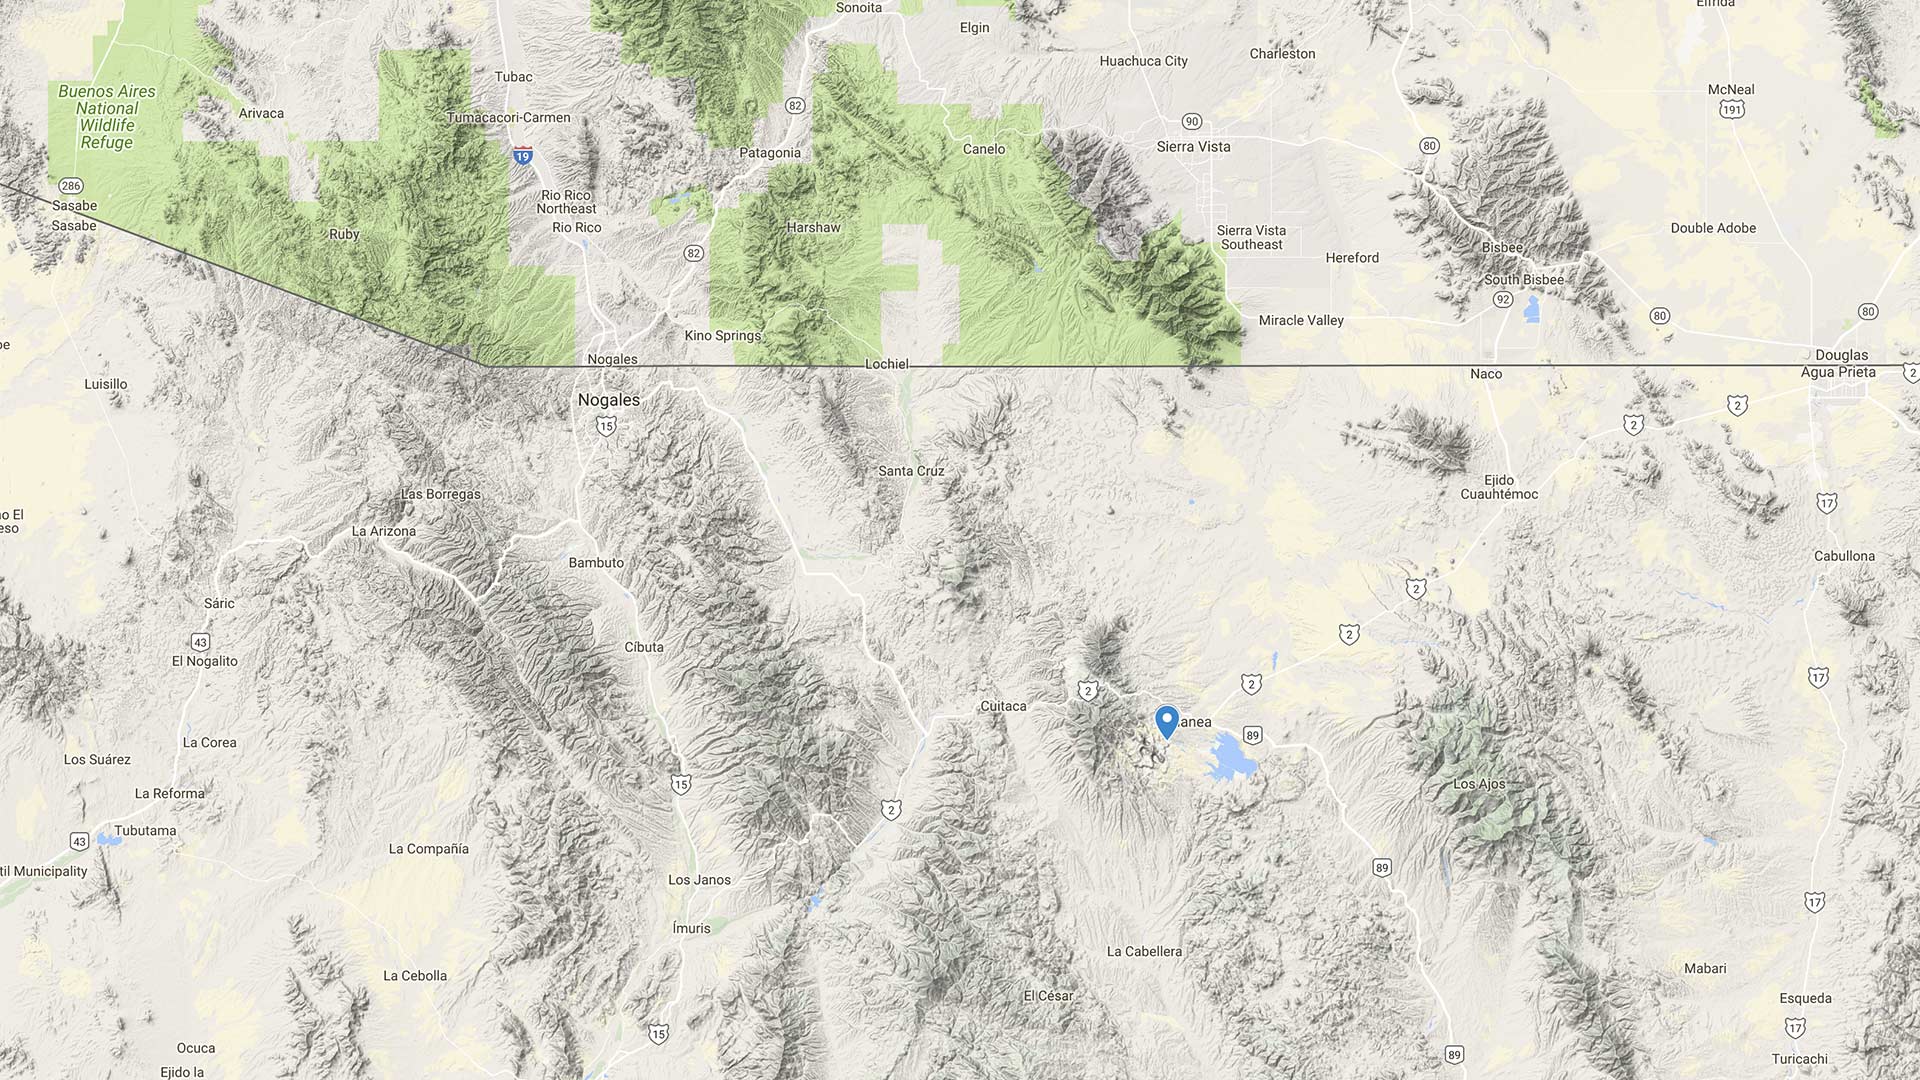 Google Maps image showing the location of the Buenavista del Cobre mine in the Mexican State of Sonora.